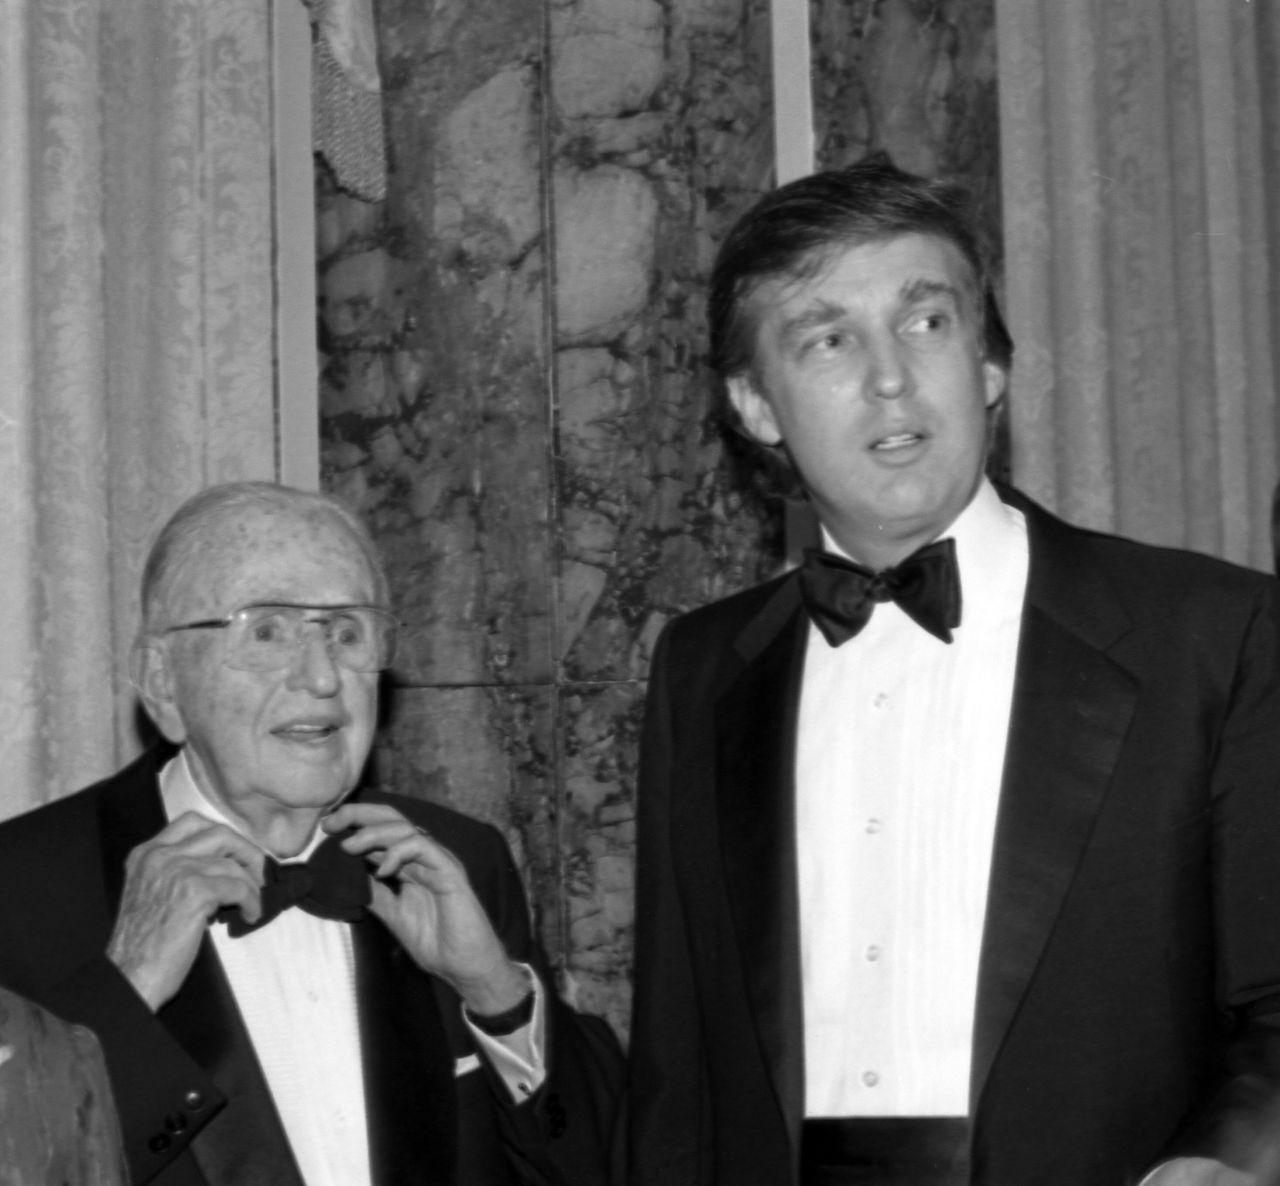 Donald Trump and Norman Vincent Peale at the latter's 90th birthday celebration at New York's Waldorf Astoria Hotel in May 1988. Peale's percepts, as outlined in his bestselling book "The Power of Positive Thinking," have served as a major influence in Trump's life -- but have served him poorly amid the coronavirus pandemic.